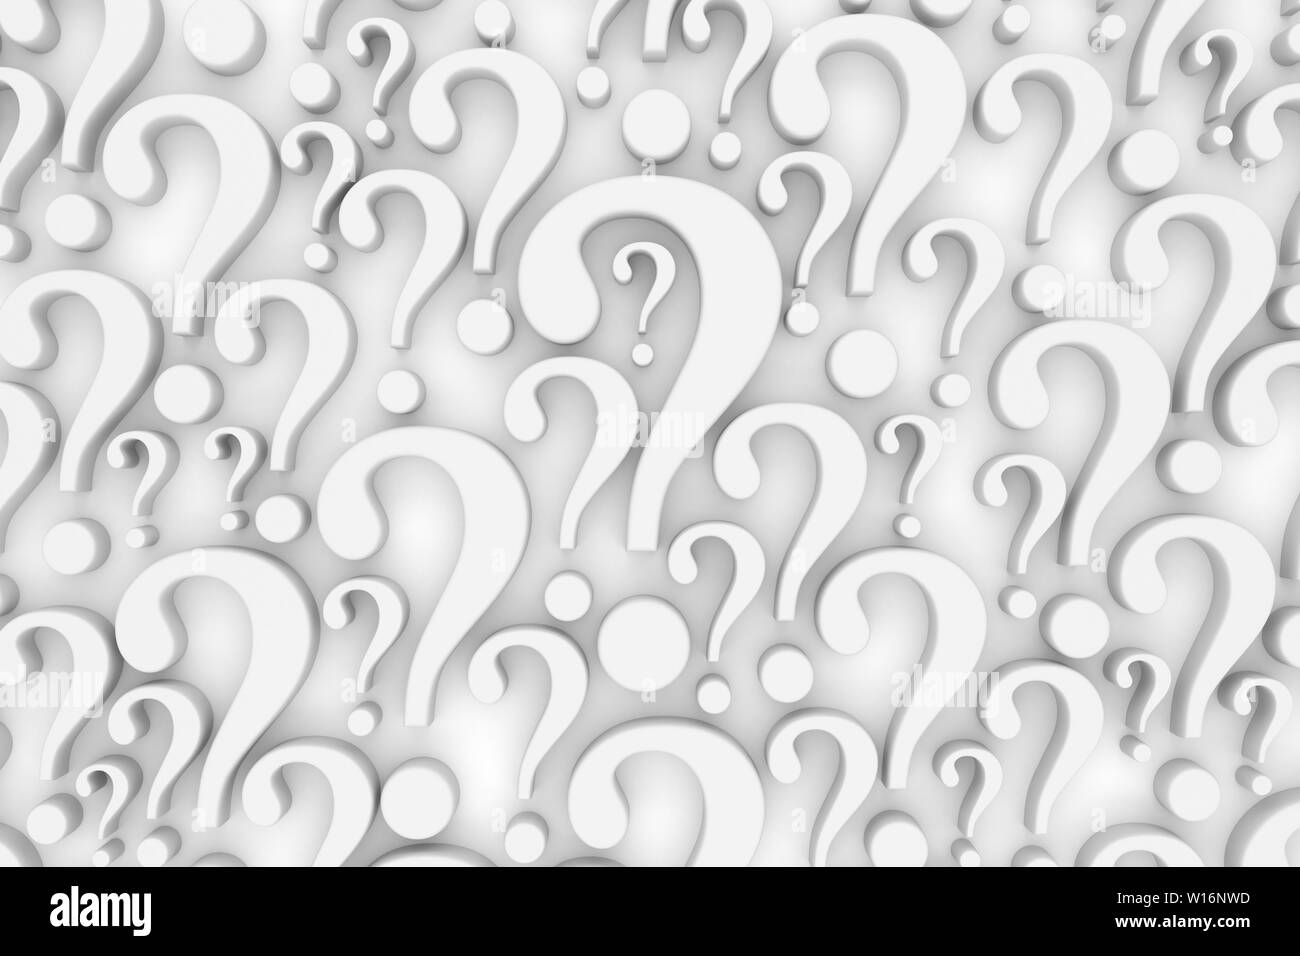 Question mark background - 3d render Stock Photo